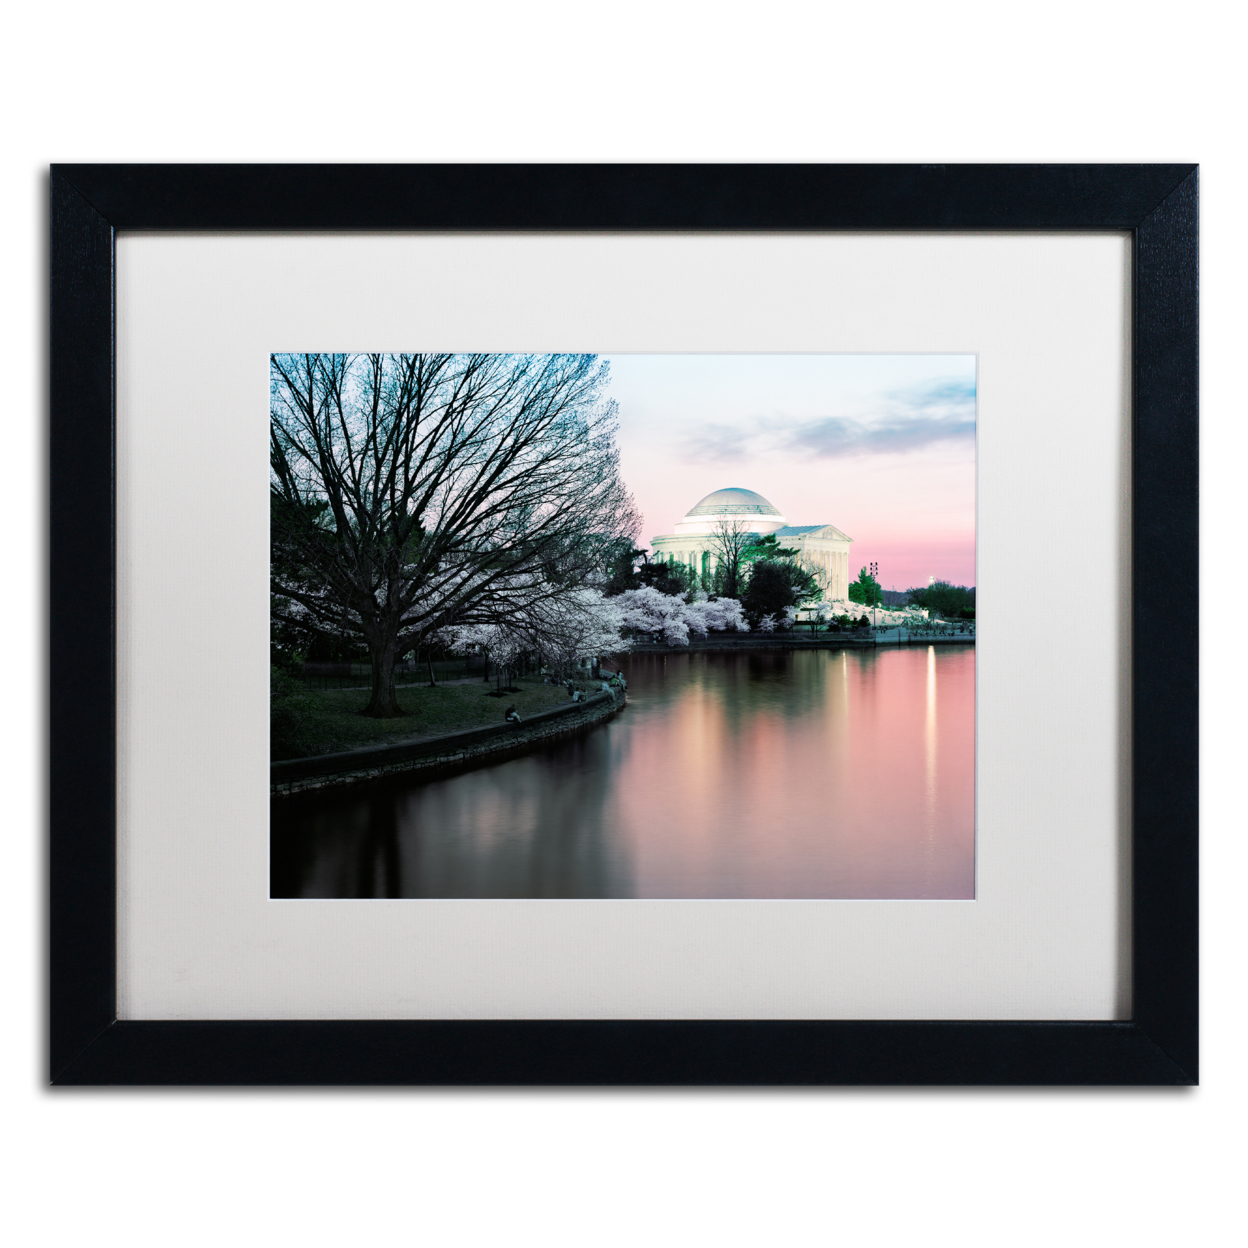 Gregory O'Hanlon 'Cherry Blossoms Twilight' Black Wooden Framed Art 18 X 22 Inches